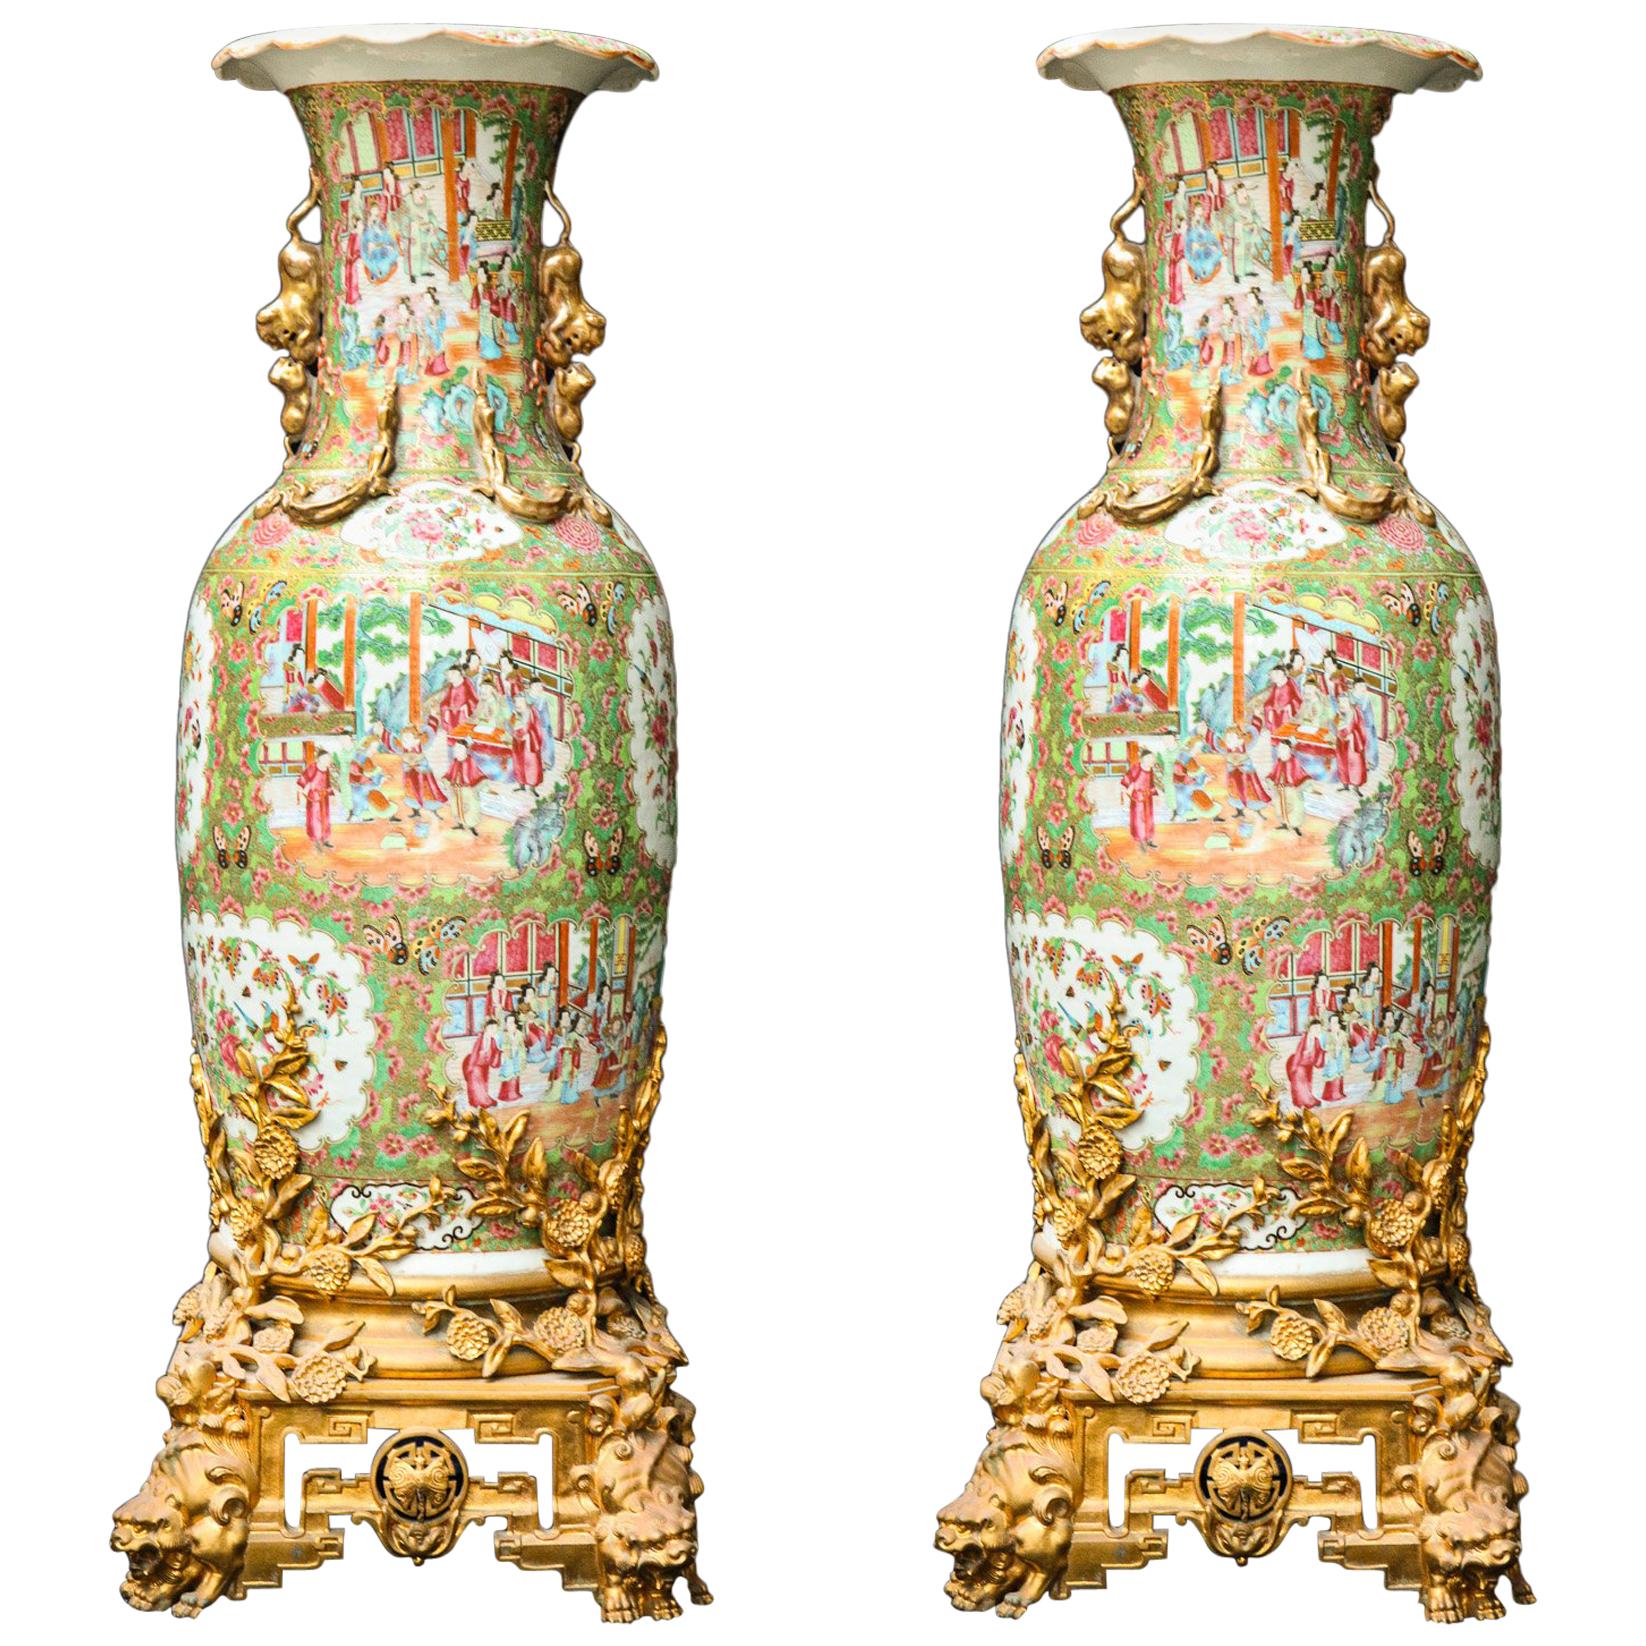 Pair of Palatial Gilt Bronze Mounted Chinese Export Famille Rose Porcelain Vases